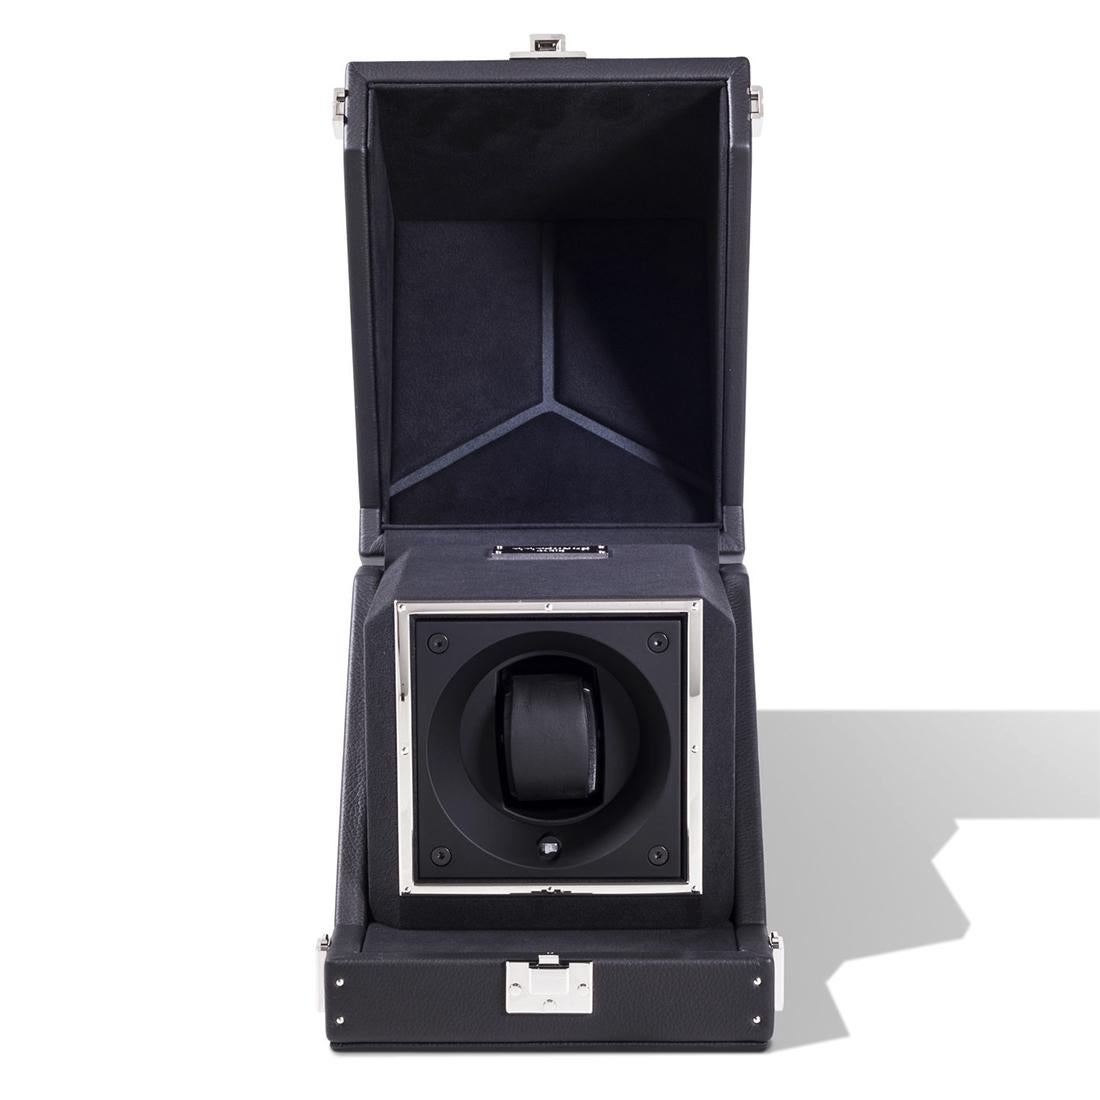 Box single Luxwatch black covered with black
grained cowhide leather. With jewelry parts in solid brass,
with hand polished nickel plated. With bottom feet
in hand-polished and nickel-plated solid brass.
Padding and lining in black slate